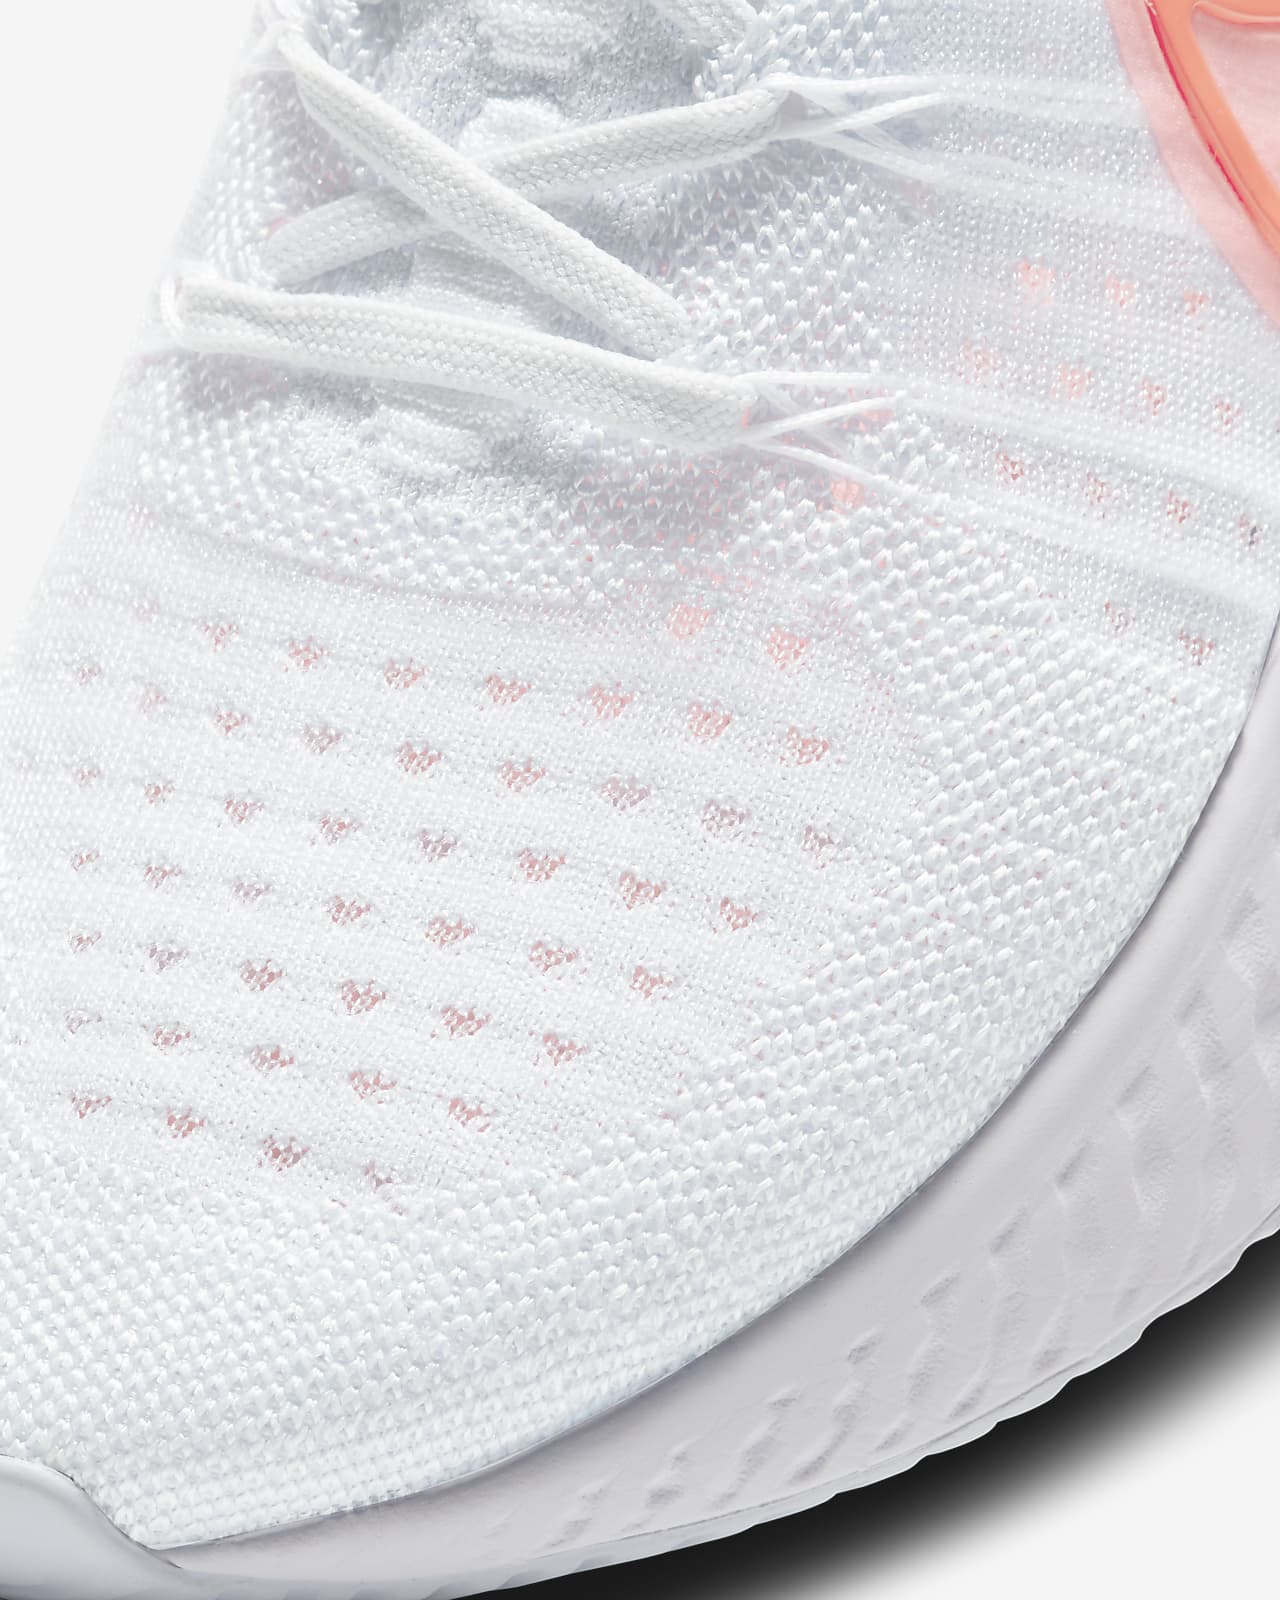 how to clean white flyknit shoes